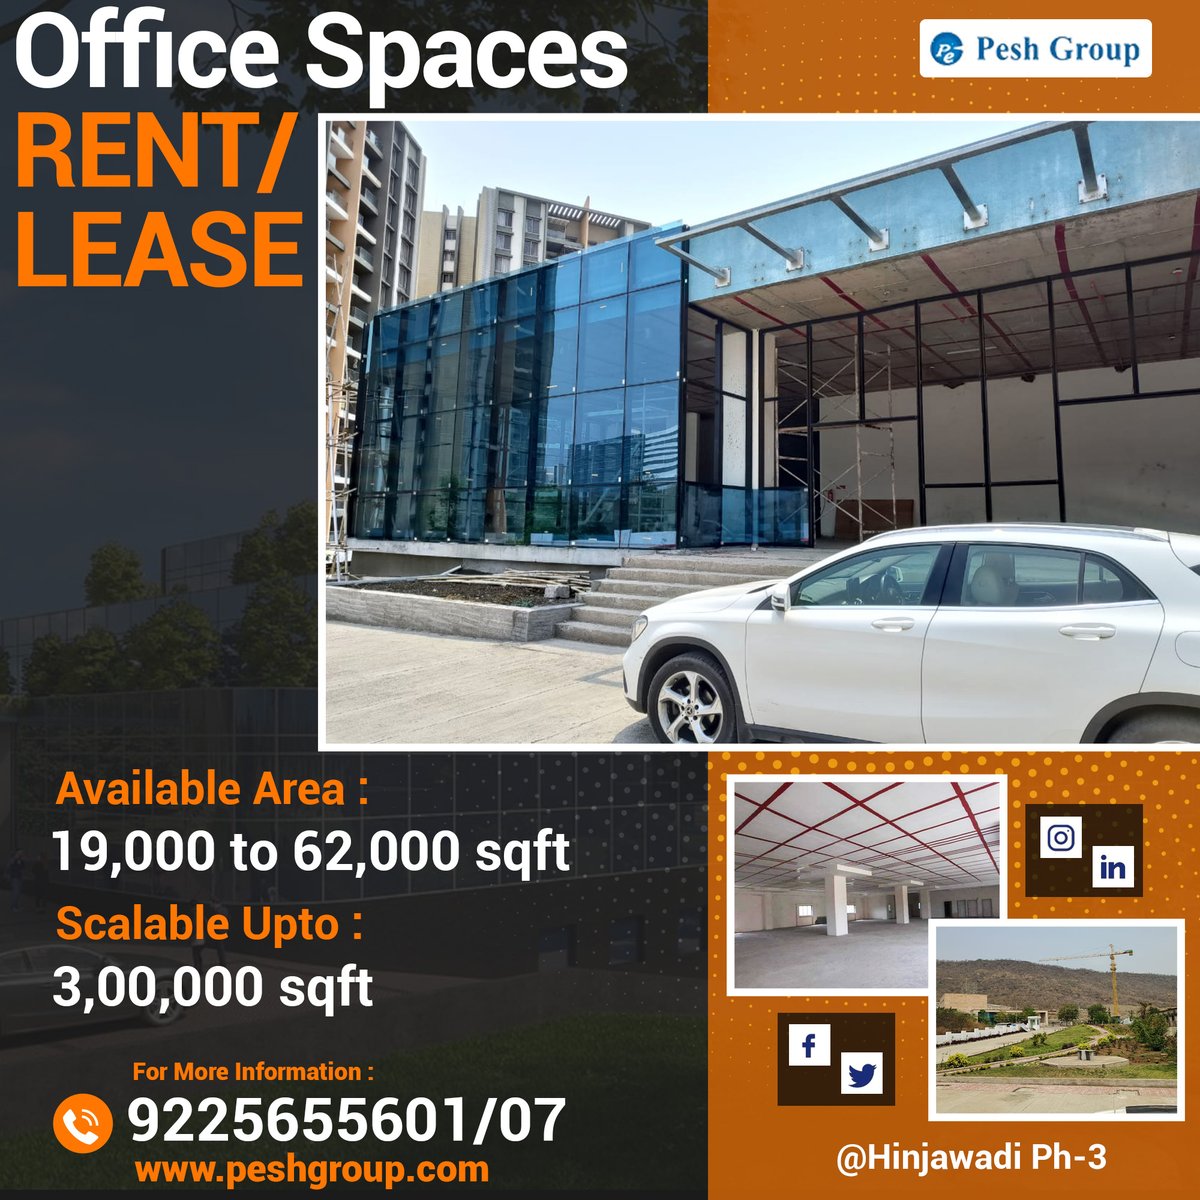 Office Space for Rent/Lease @ Hinjawadi Phase-3 
Bare Shell Office Area: 𝟏𝟗𝟎𝟎𝟎 𝐭𝐨 𝟔𝟐𝟎𝟎𝟎 𝐬𝐪𝐟𝐭 
 📞𝟗𝟐𝟐𝟓𝟔𝟓𝟓𝟔𝟎𝟏/𝟎𝟕
🌐 peshgroup.com
#peshgroup #officespaces #PuneRealEstate #primelocation #readytomove #pune  #propertydevelopers #punedevelopers